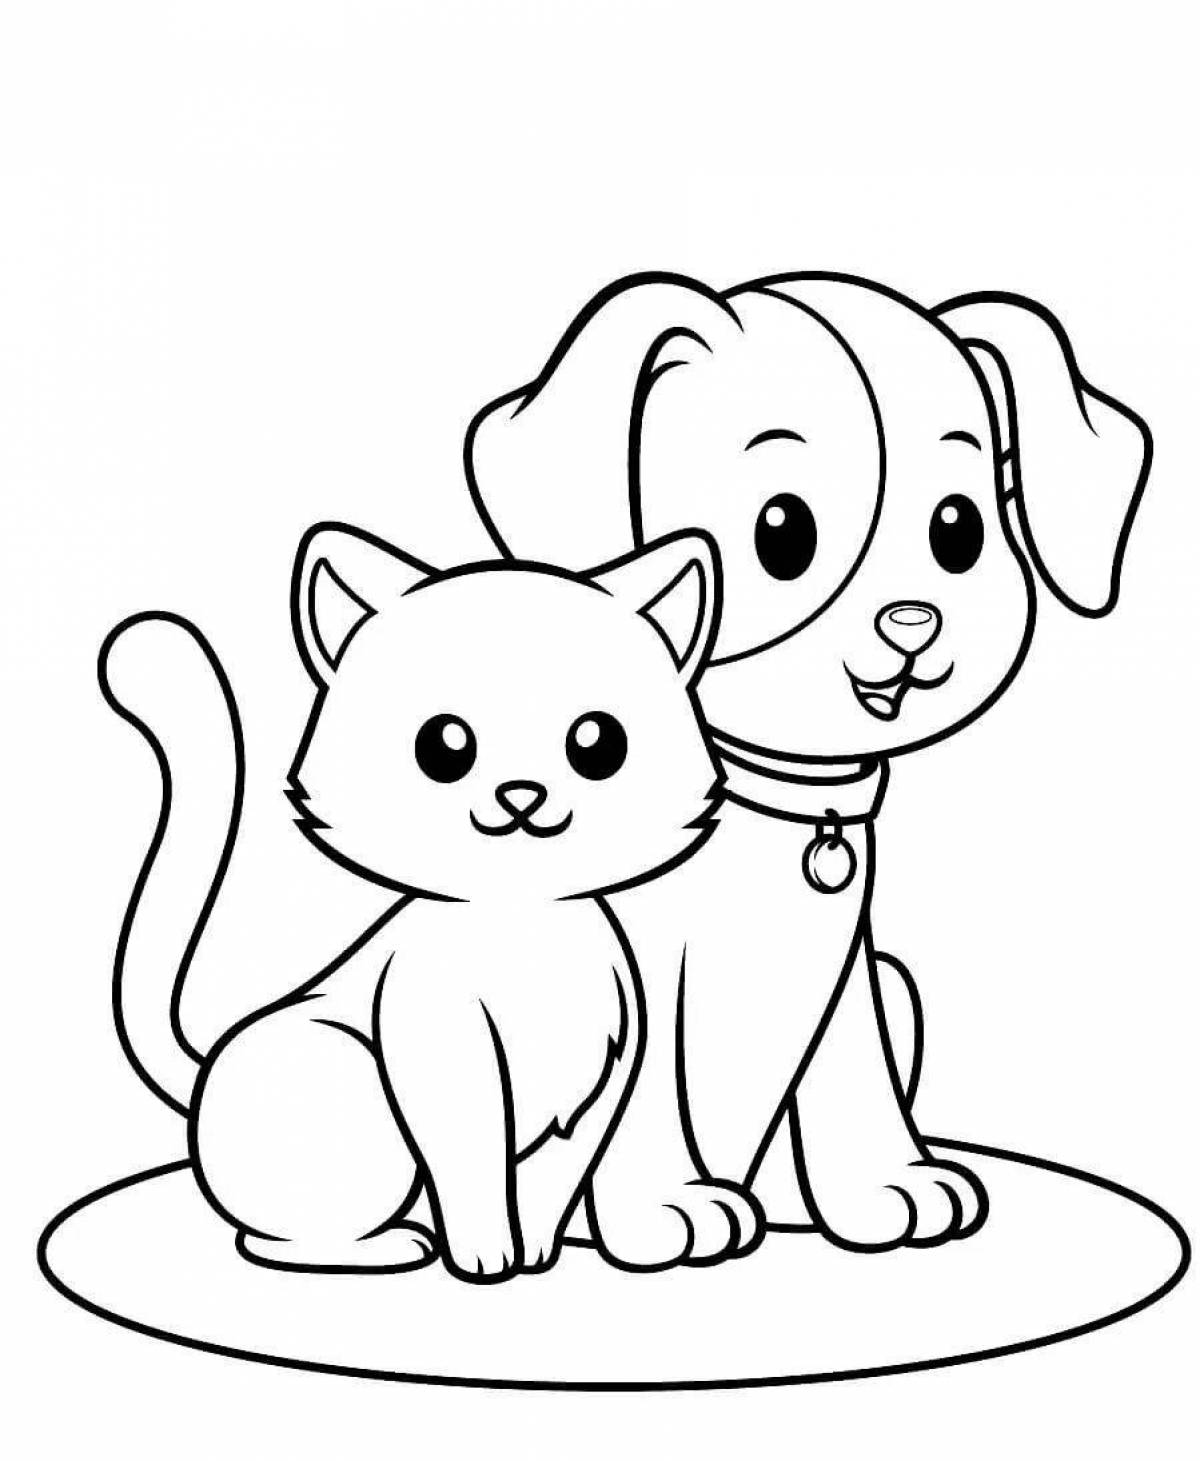 Coloring page loving cat and dog together